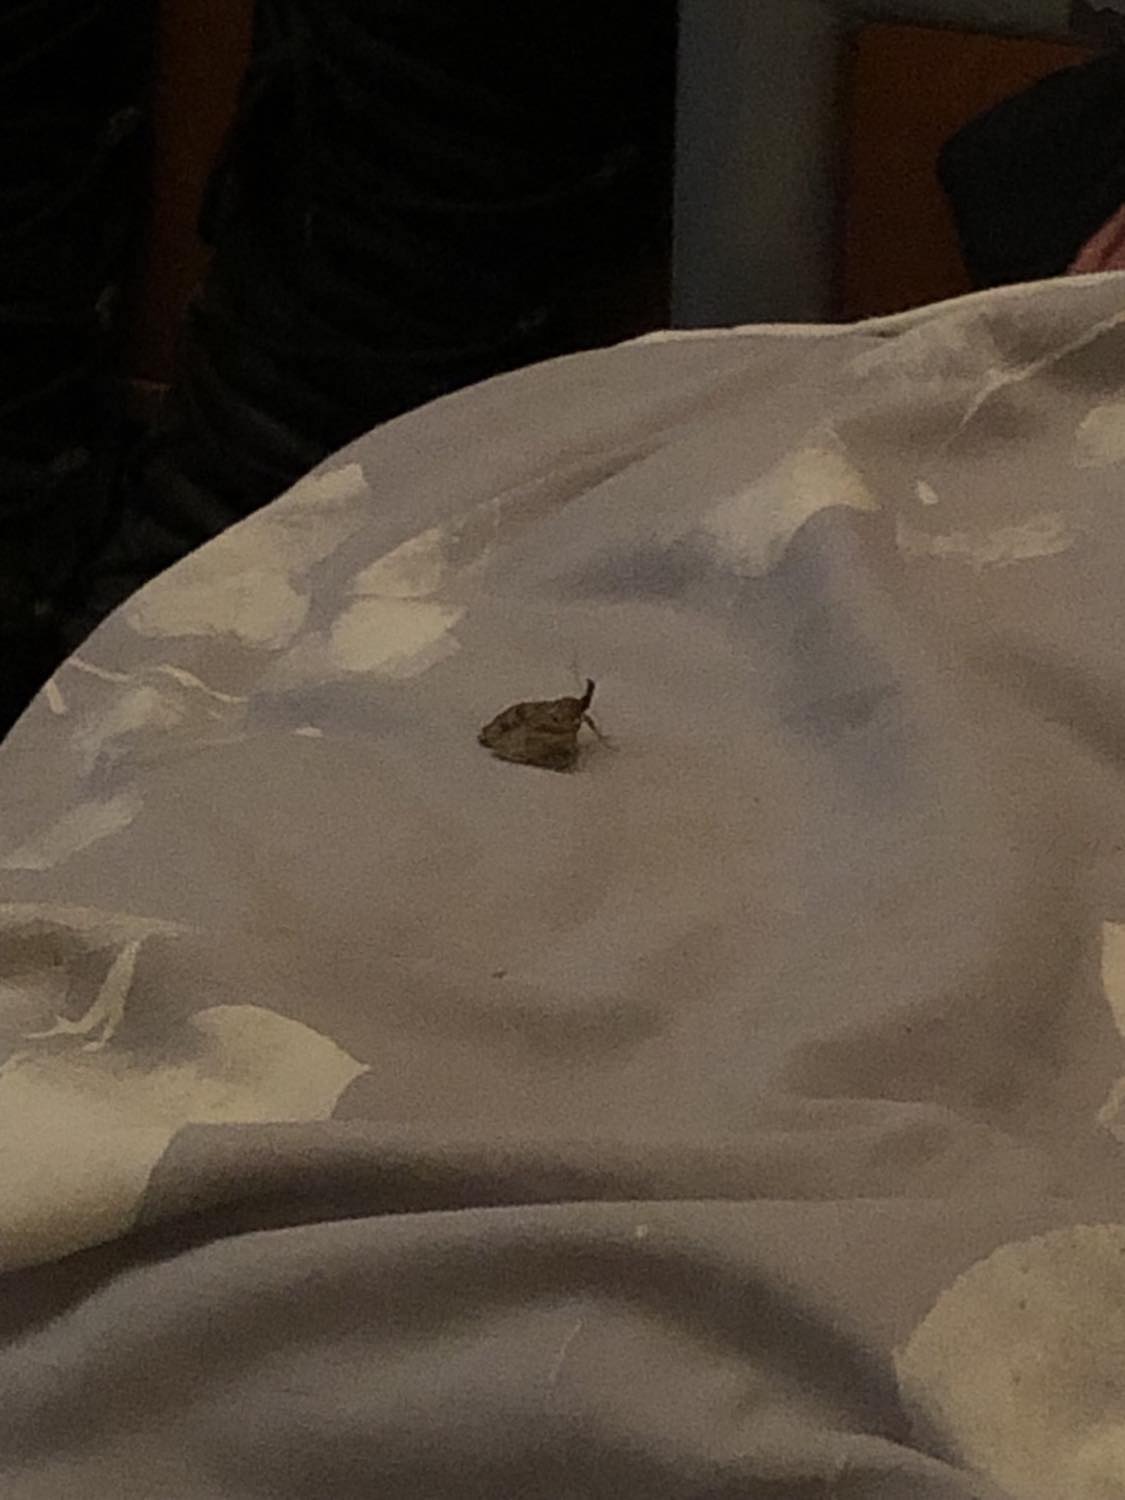 A large moth sitting on the bed next to me in the evening.